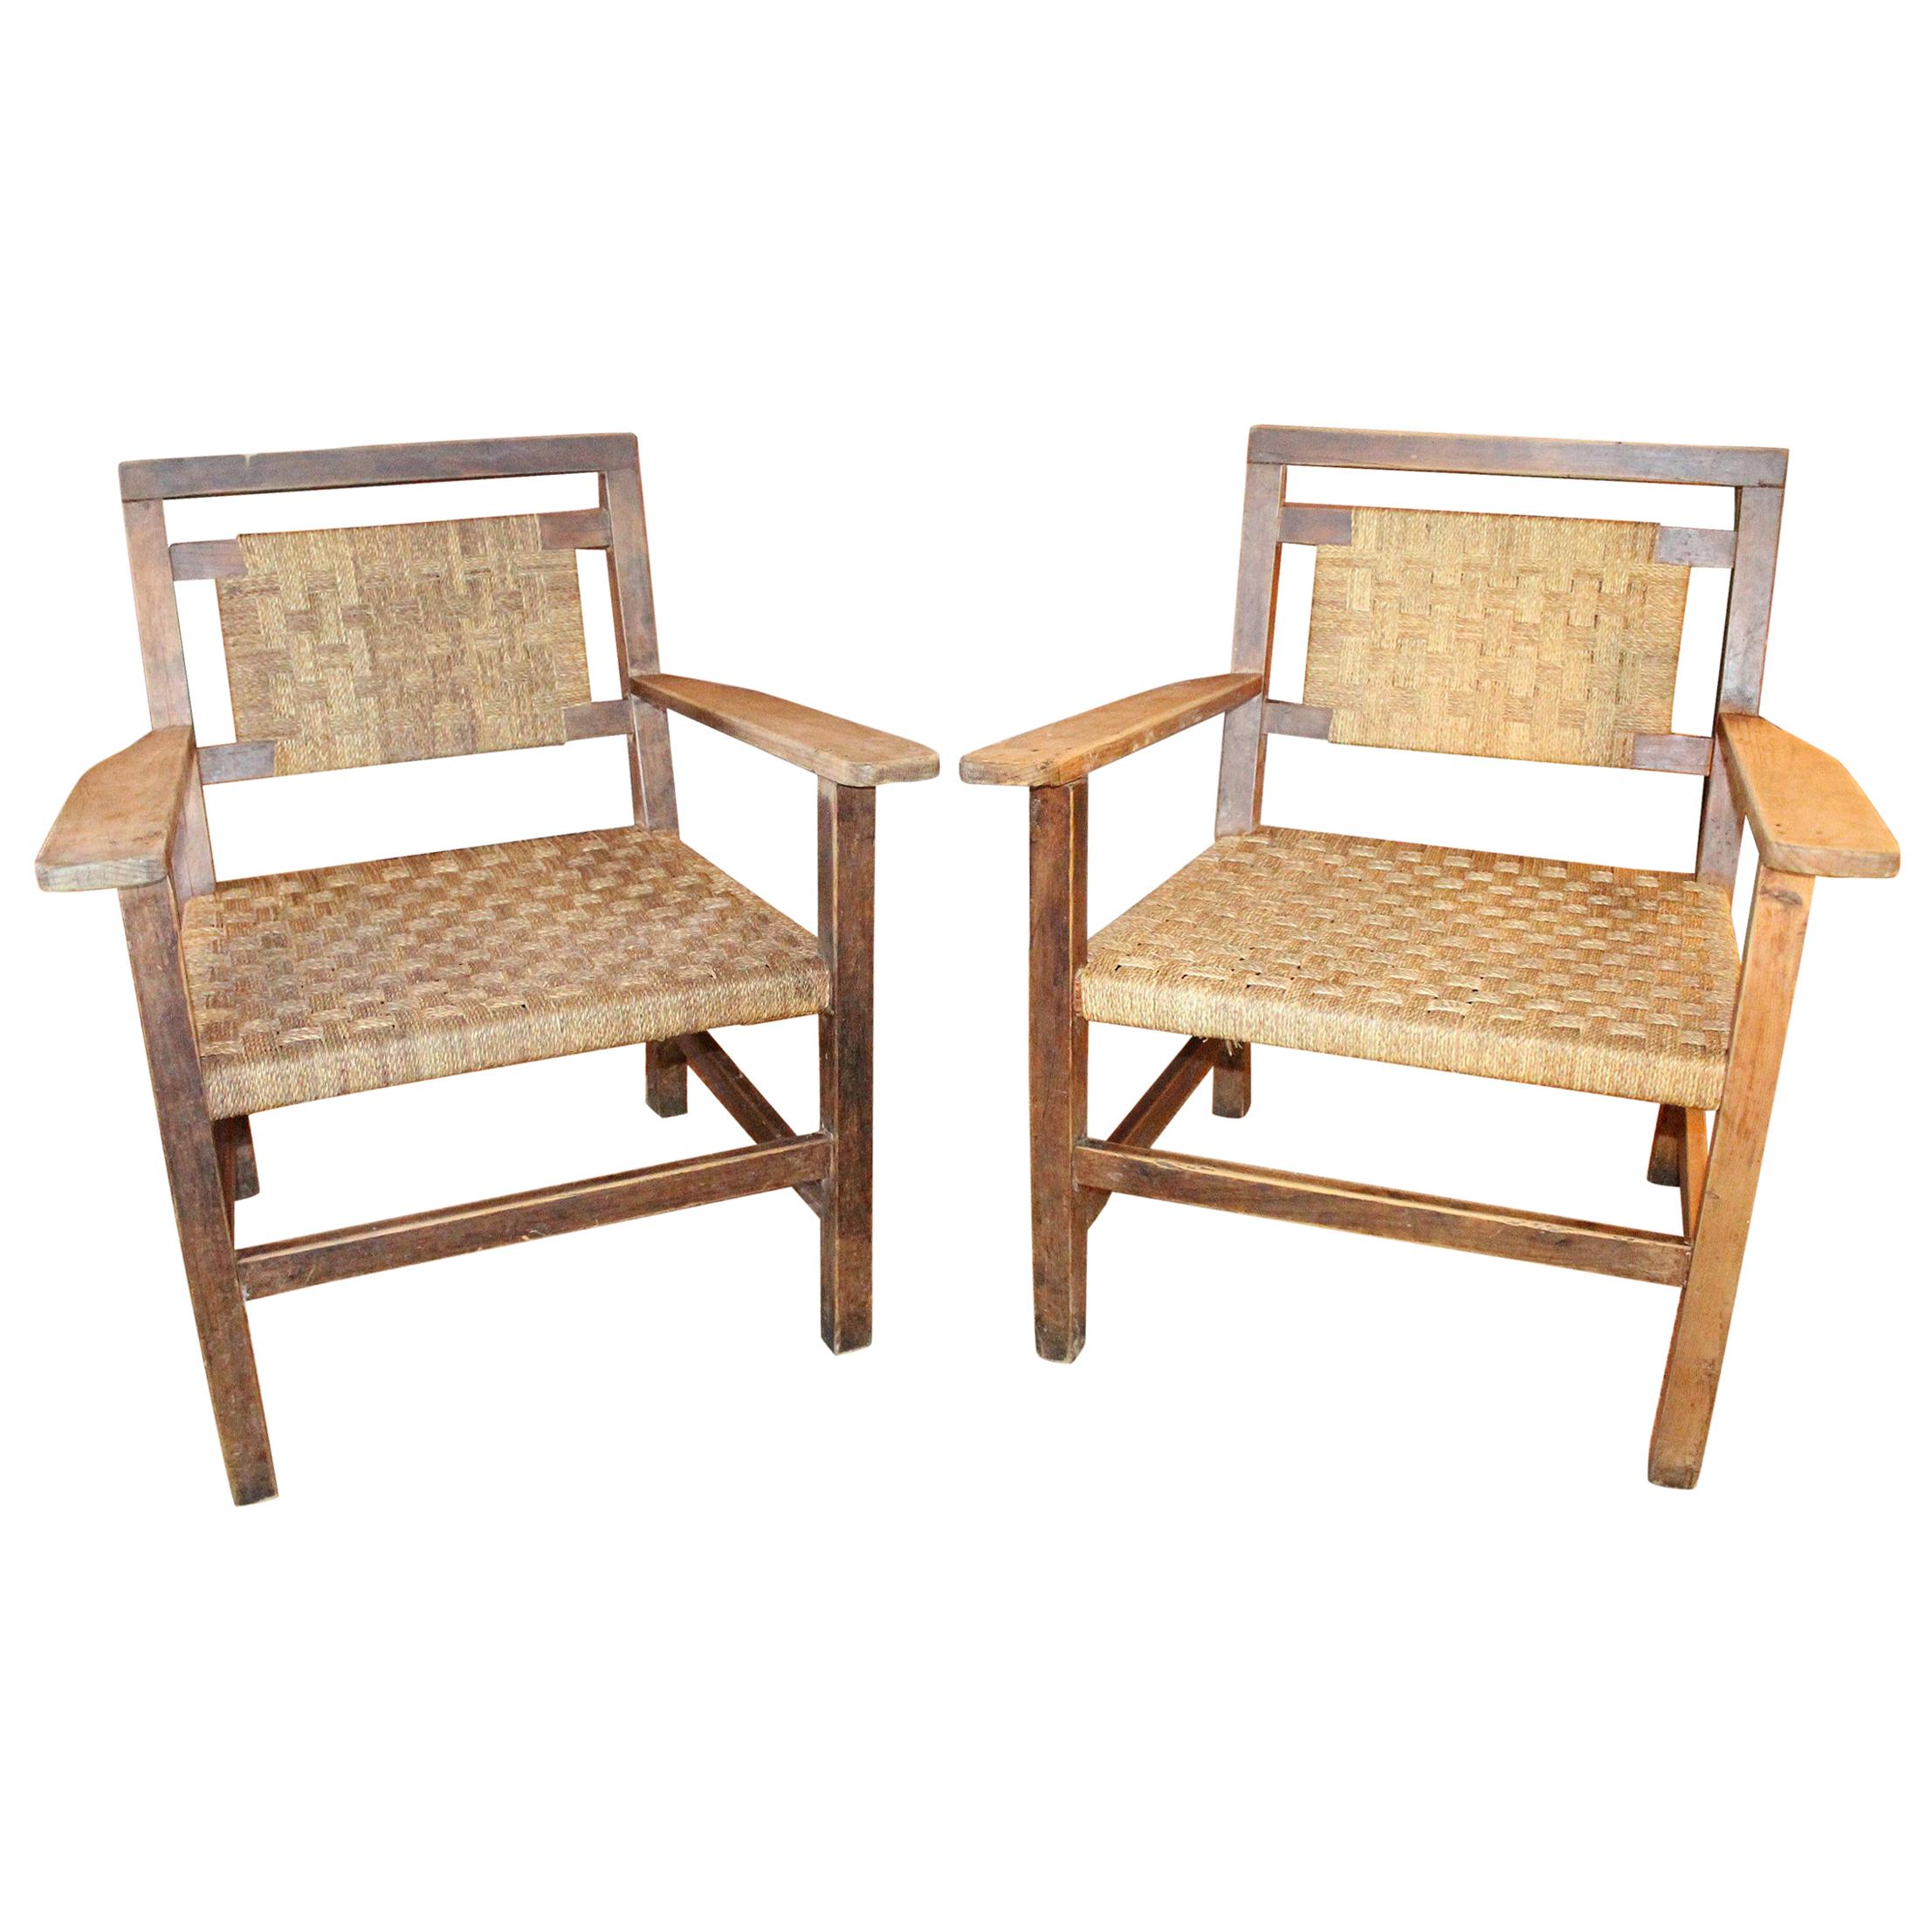 1970s Pair of Spanish Laced Wicker Wooden Armchairs